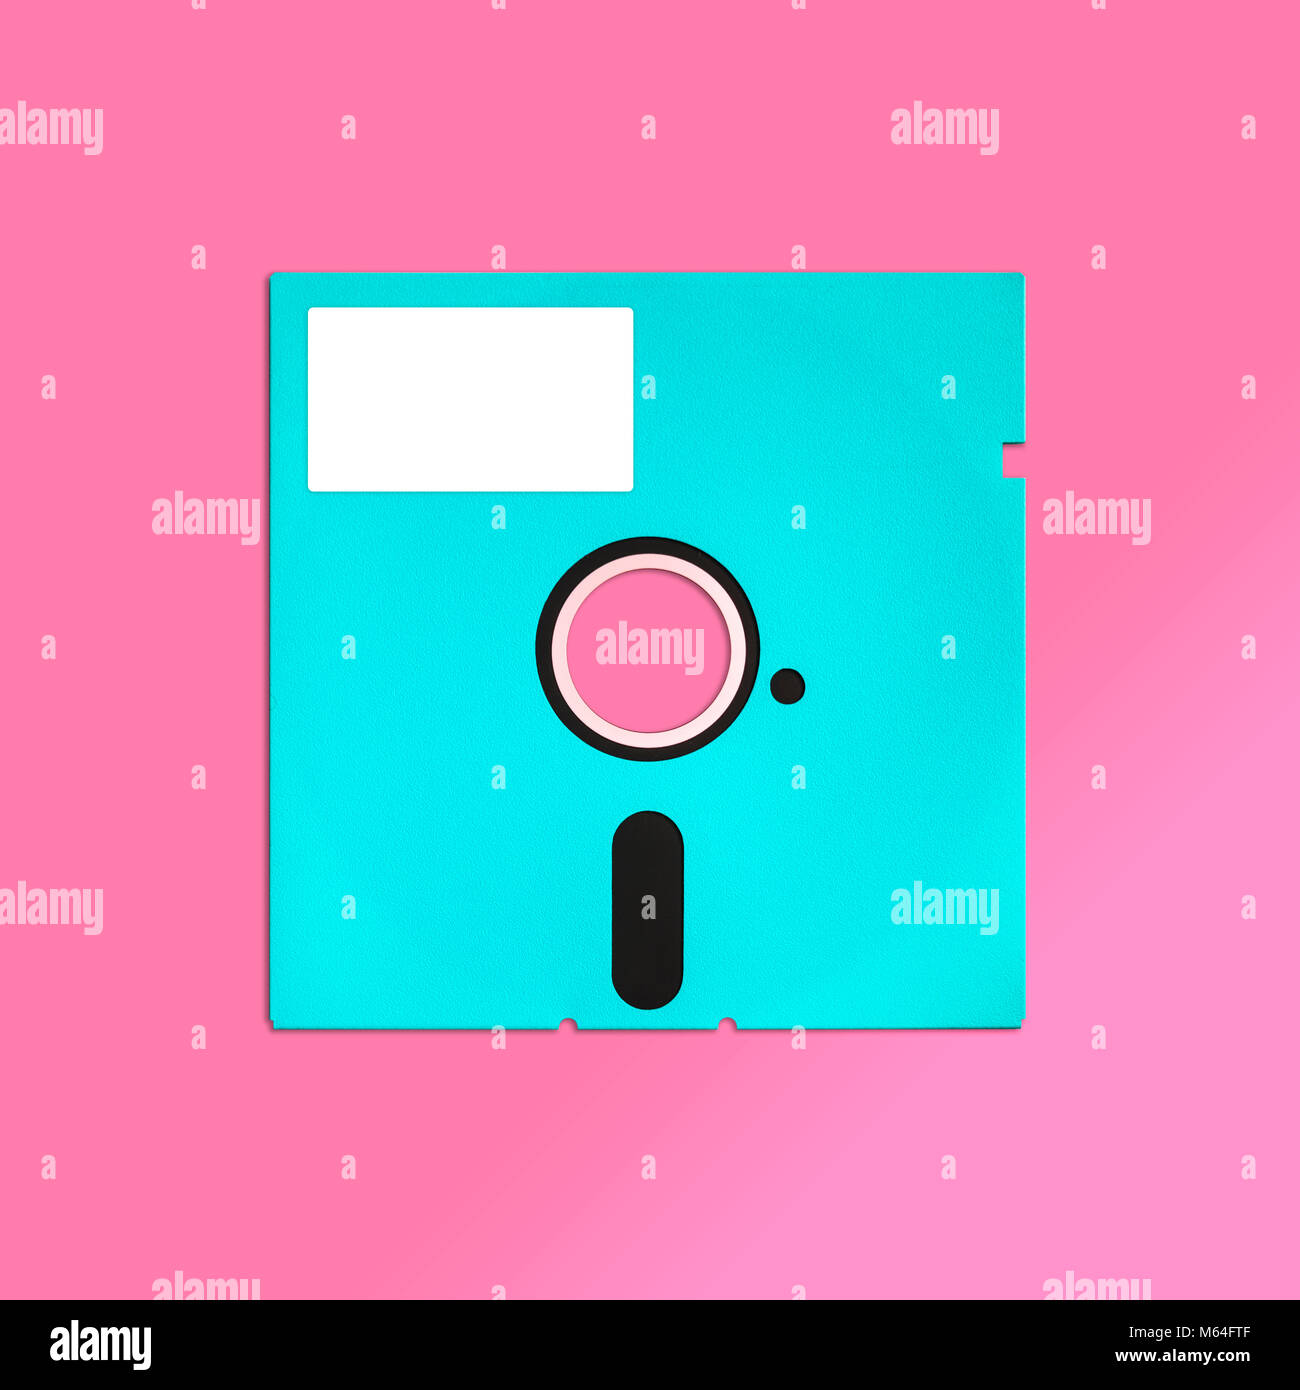 Floppy disk 5.25 Inch nostalgia, isolated and presented in punchy pastel colors with blank white customizable label, for creative design, web & print Stock Photo